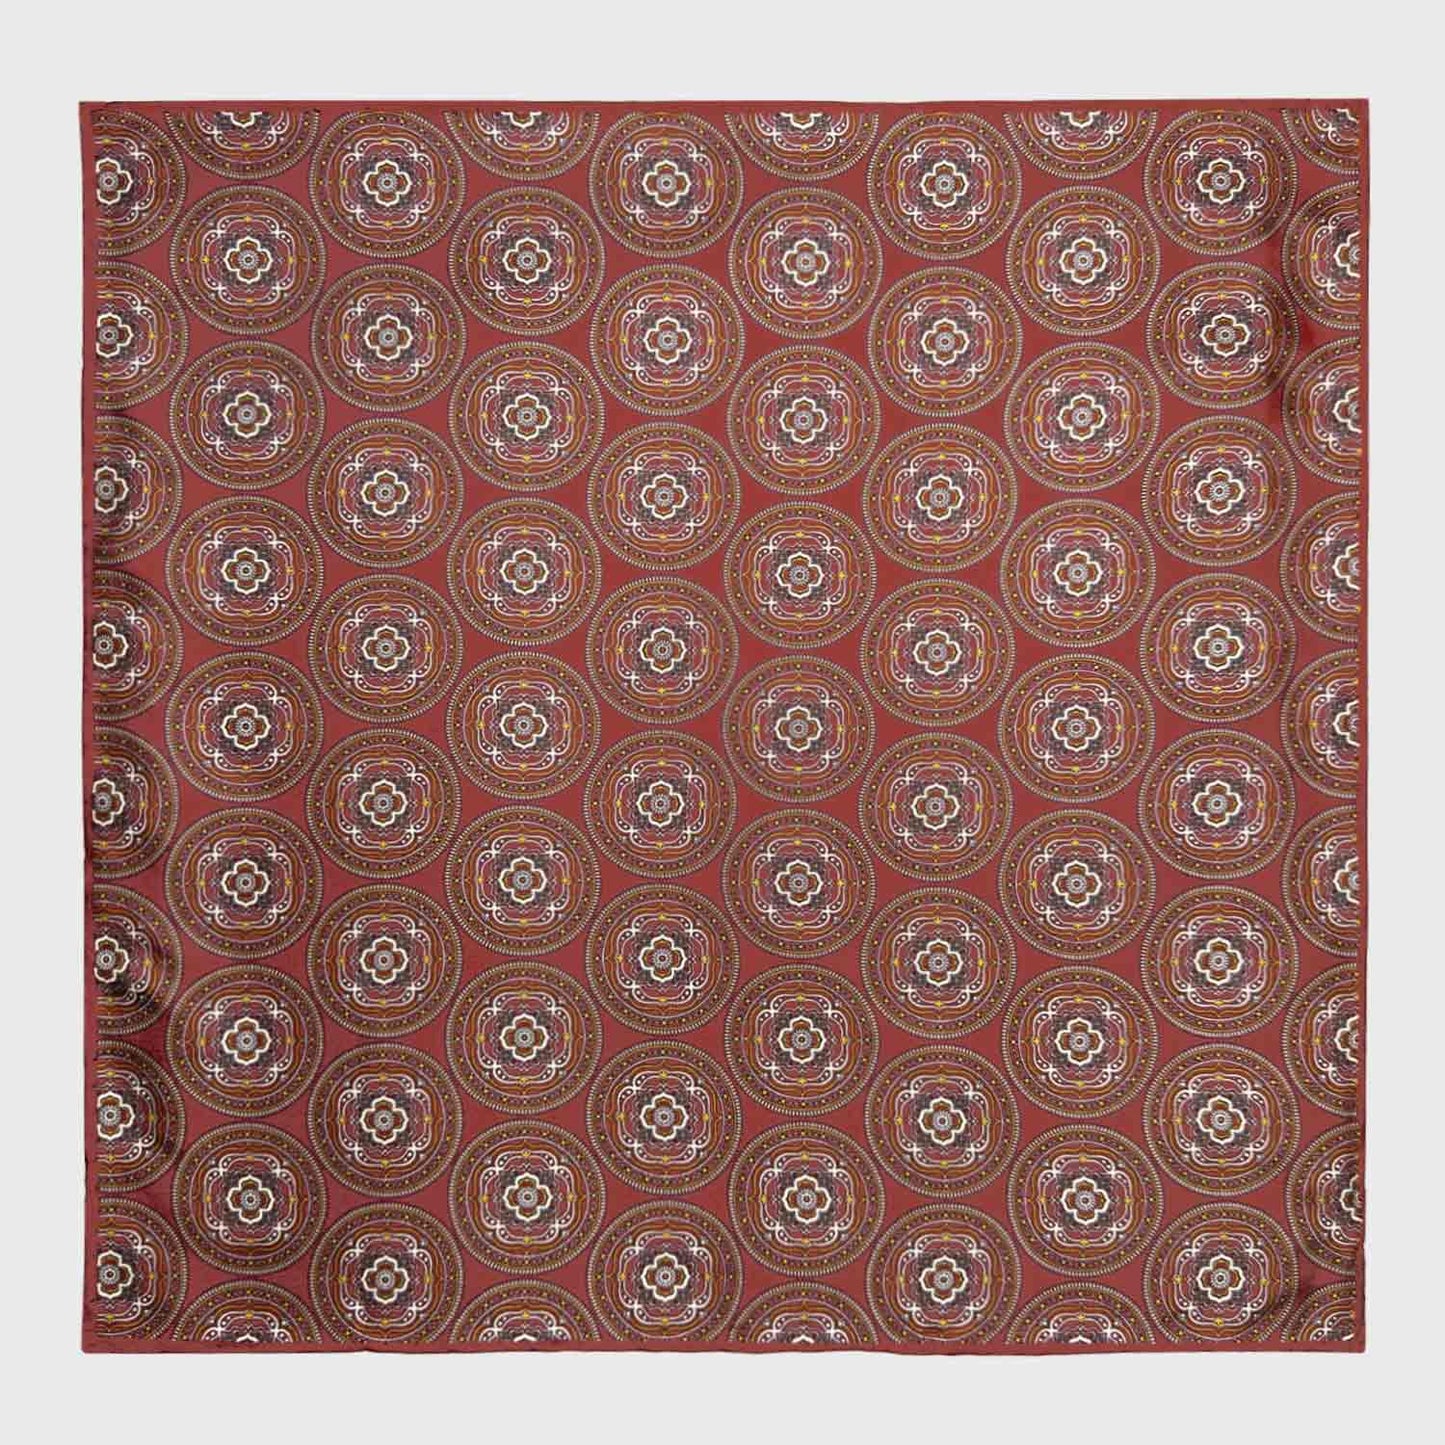 Copper Brown Silk Pocket Square Mandala Medallions. Men's pocket square made with soft silk and with rolled edge, copper brown background with yellow and white mandala medallions pattern, ideal for a refined men's outfit